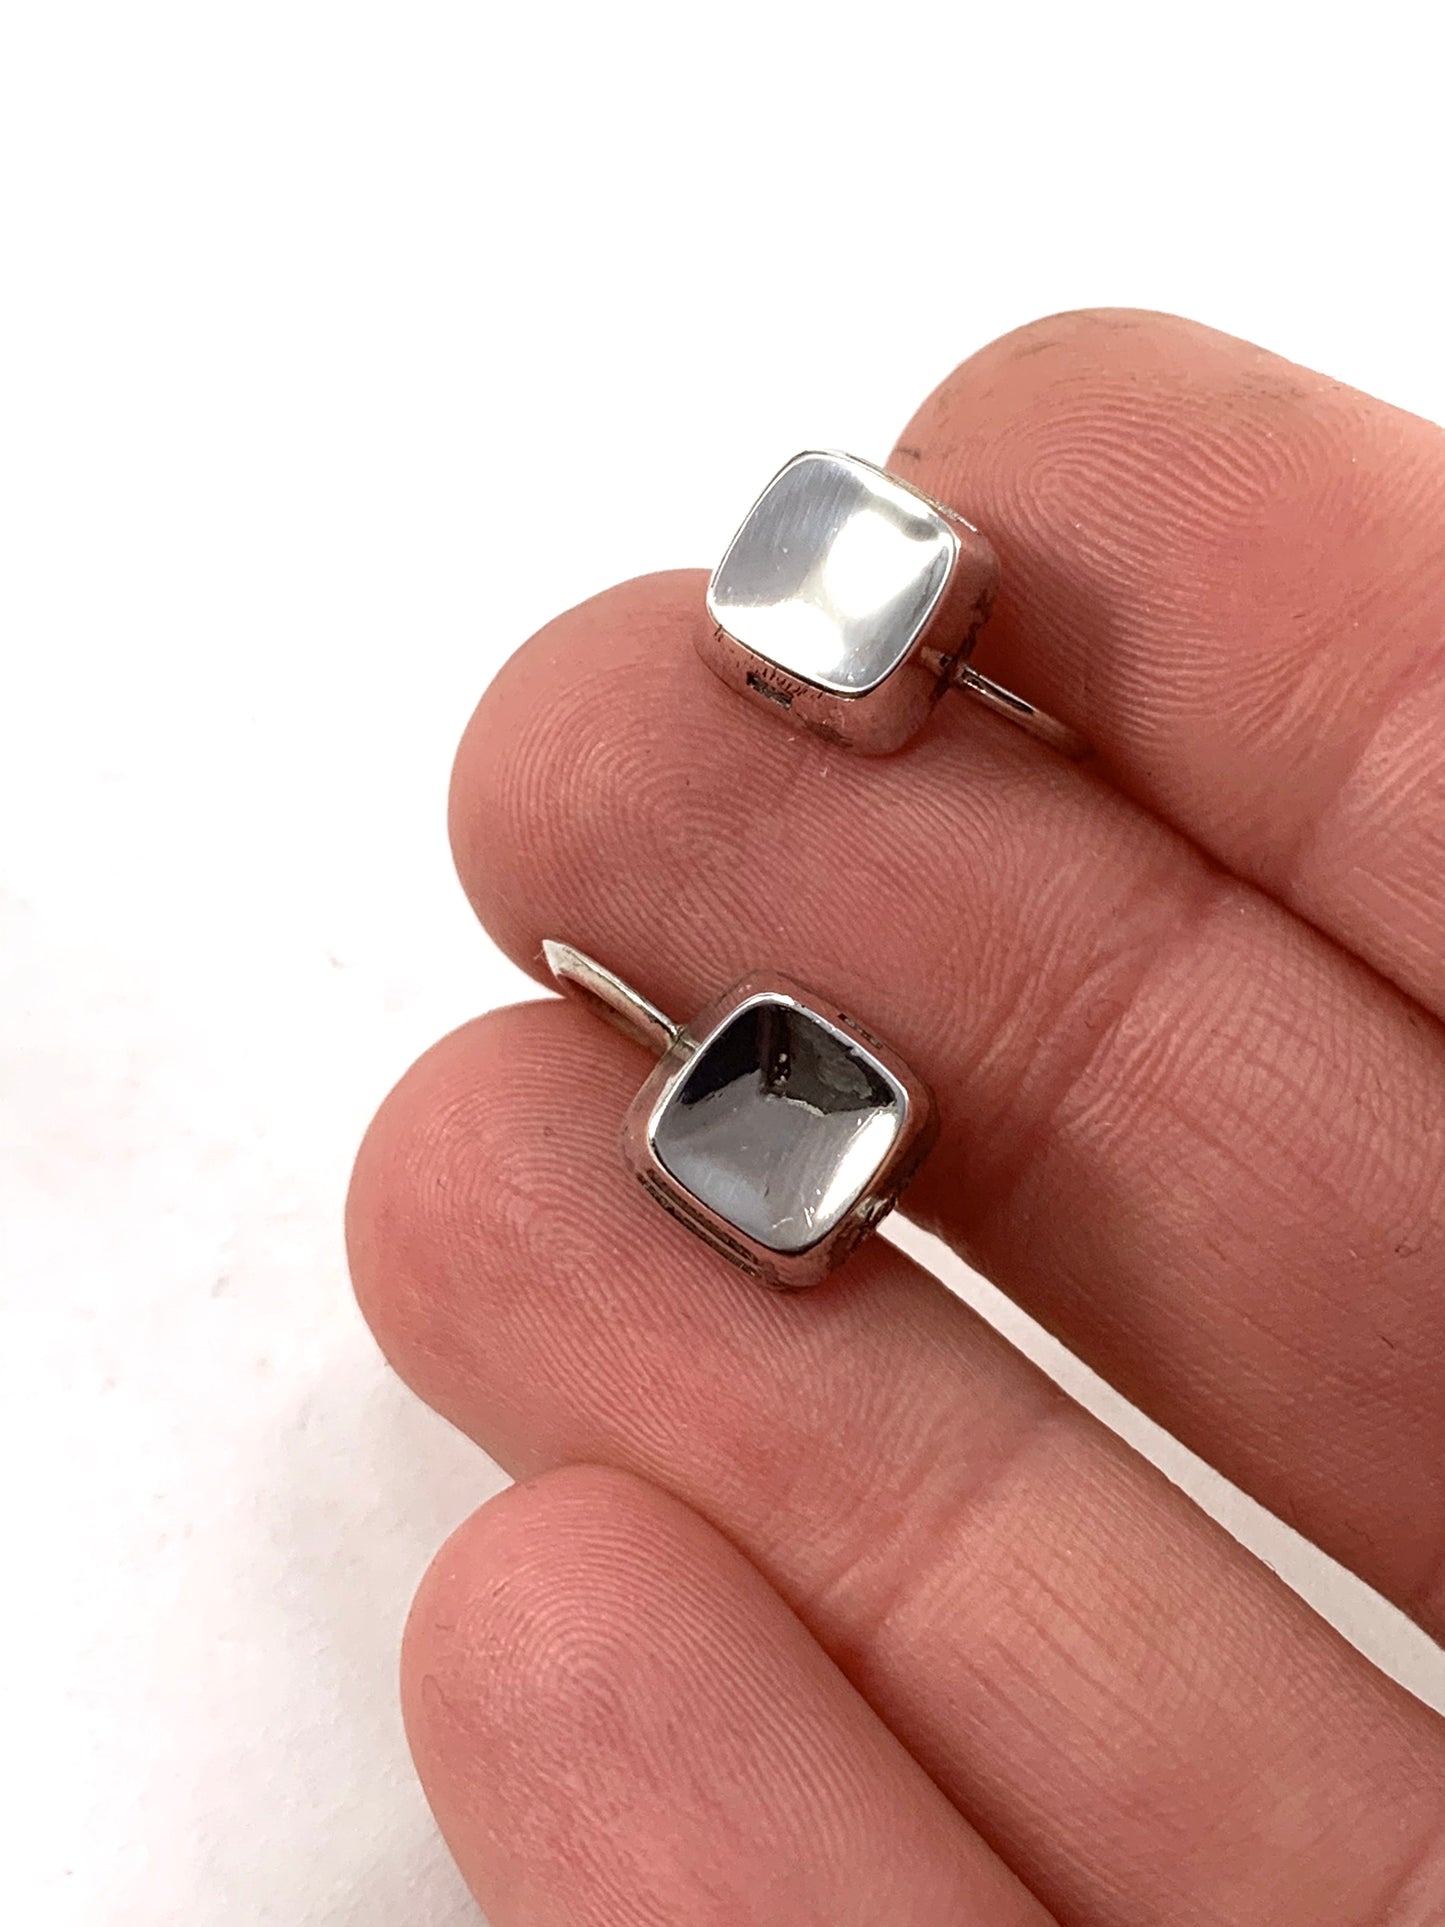 Sigurd Persson for Stigbert, Sweden year 1956, Iconic Cube Design Sterling Silver Earrings.